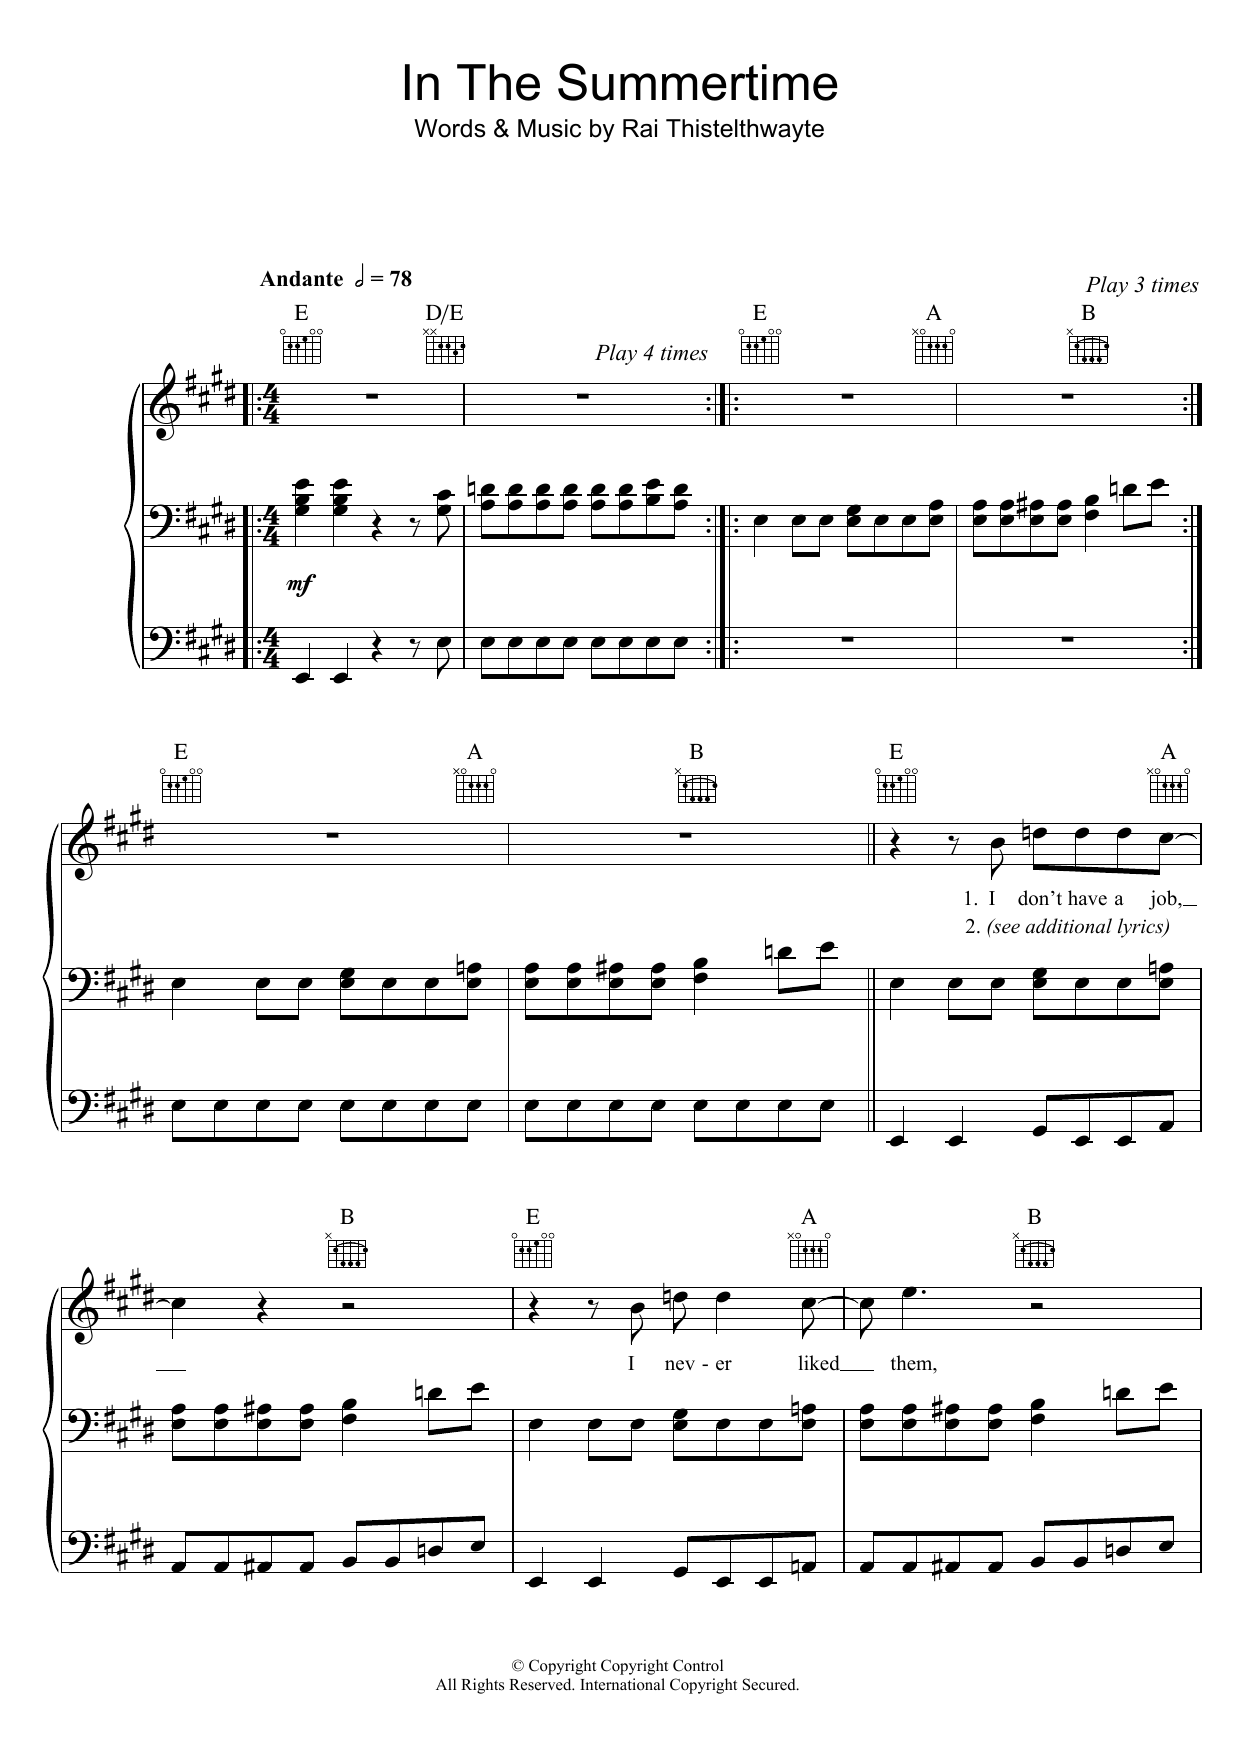 Download Thirsty Merc In The Summertime Sheet Music